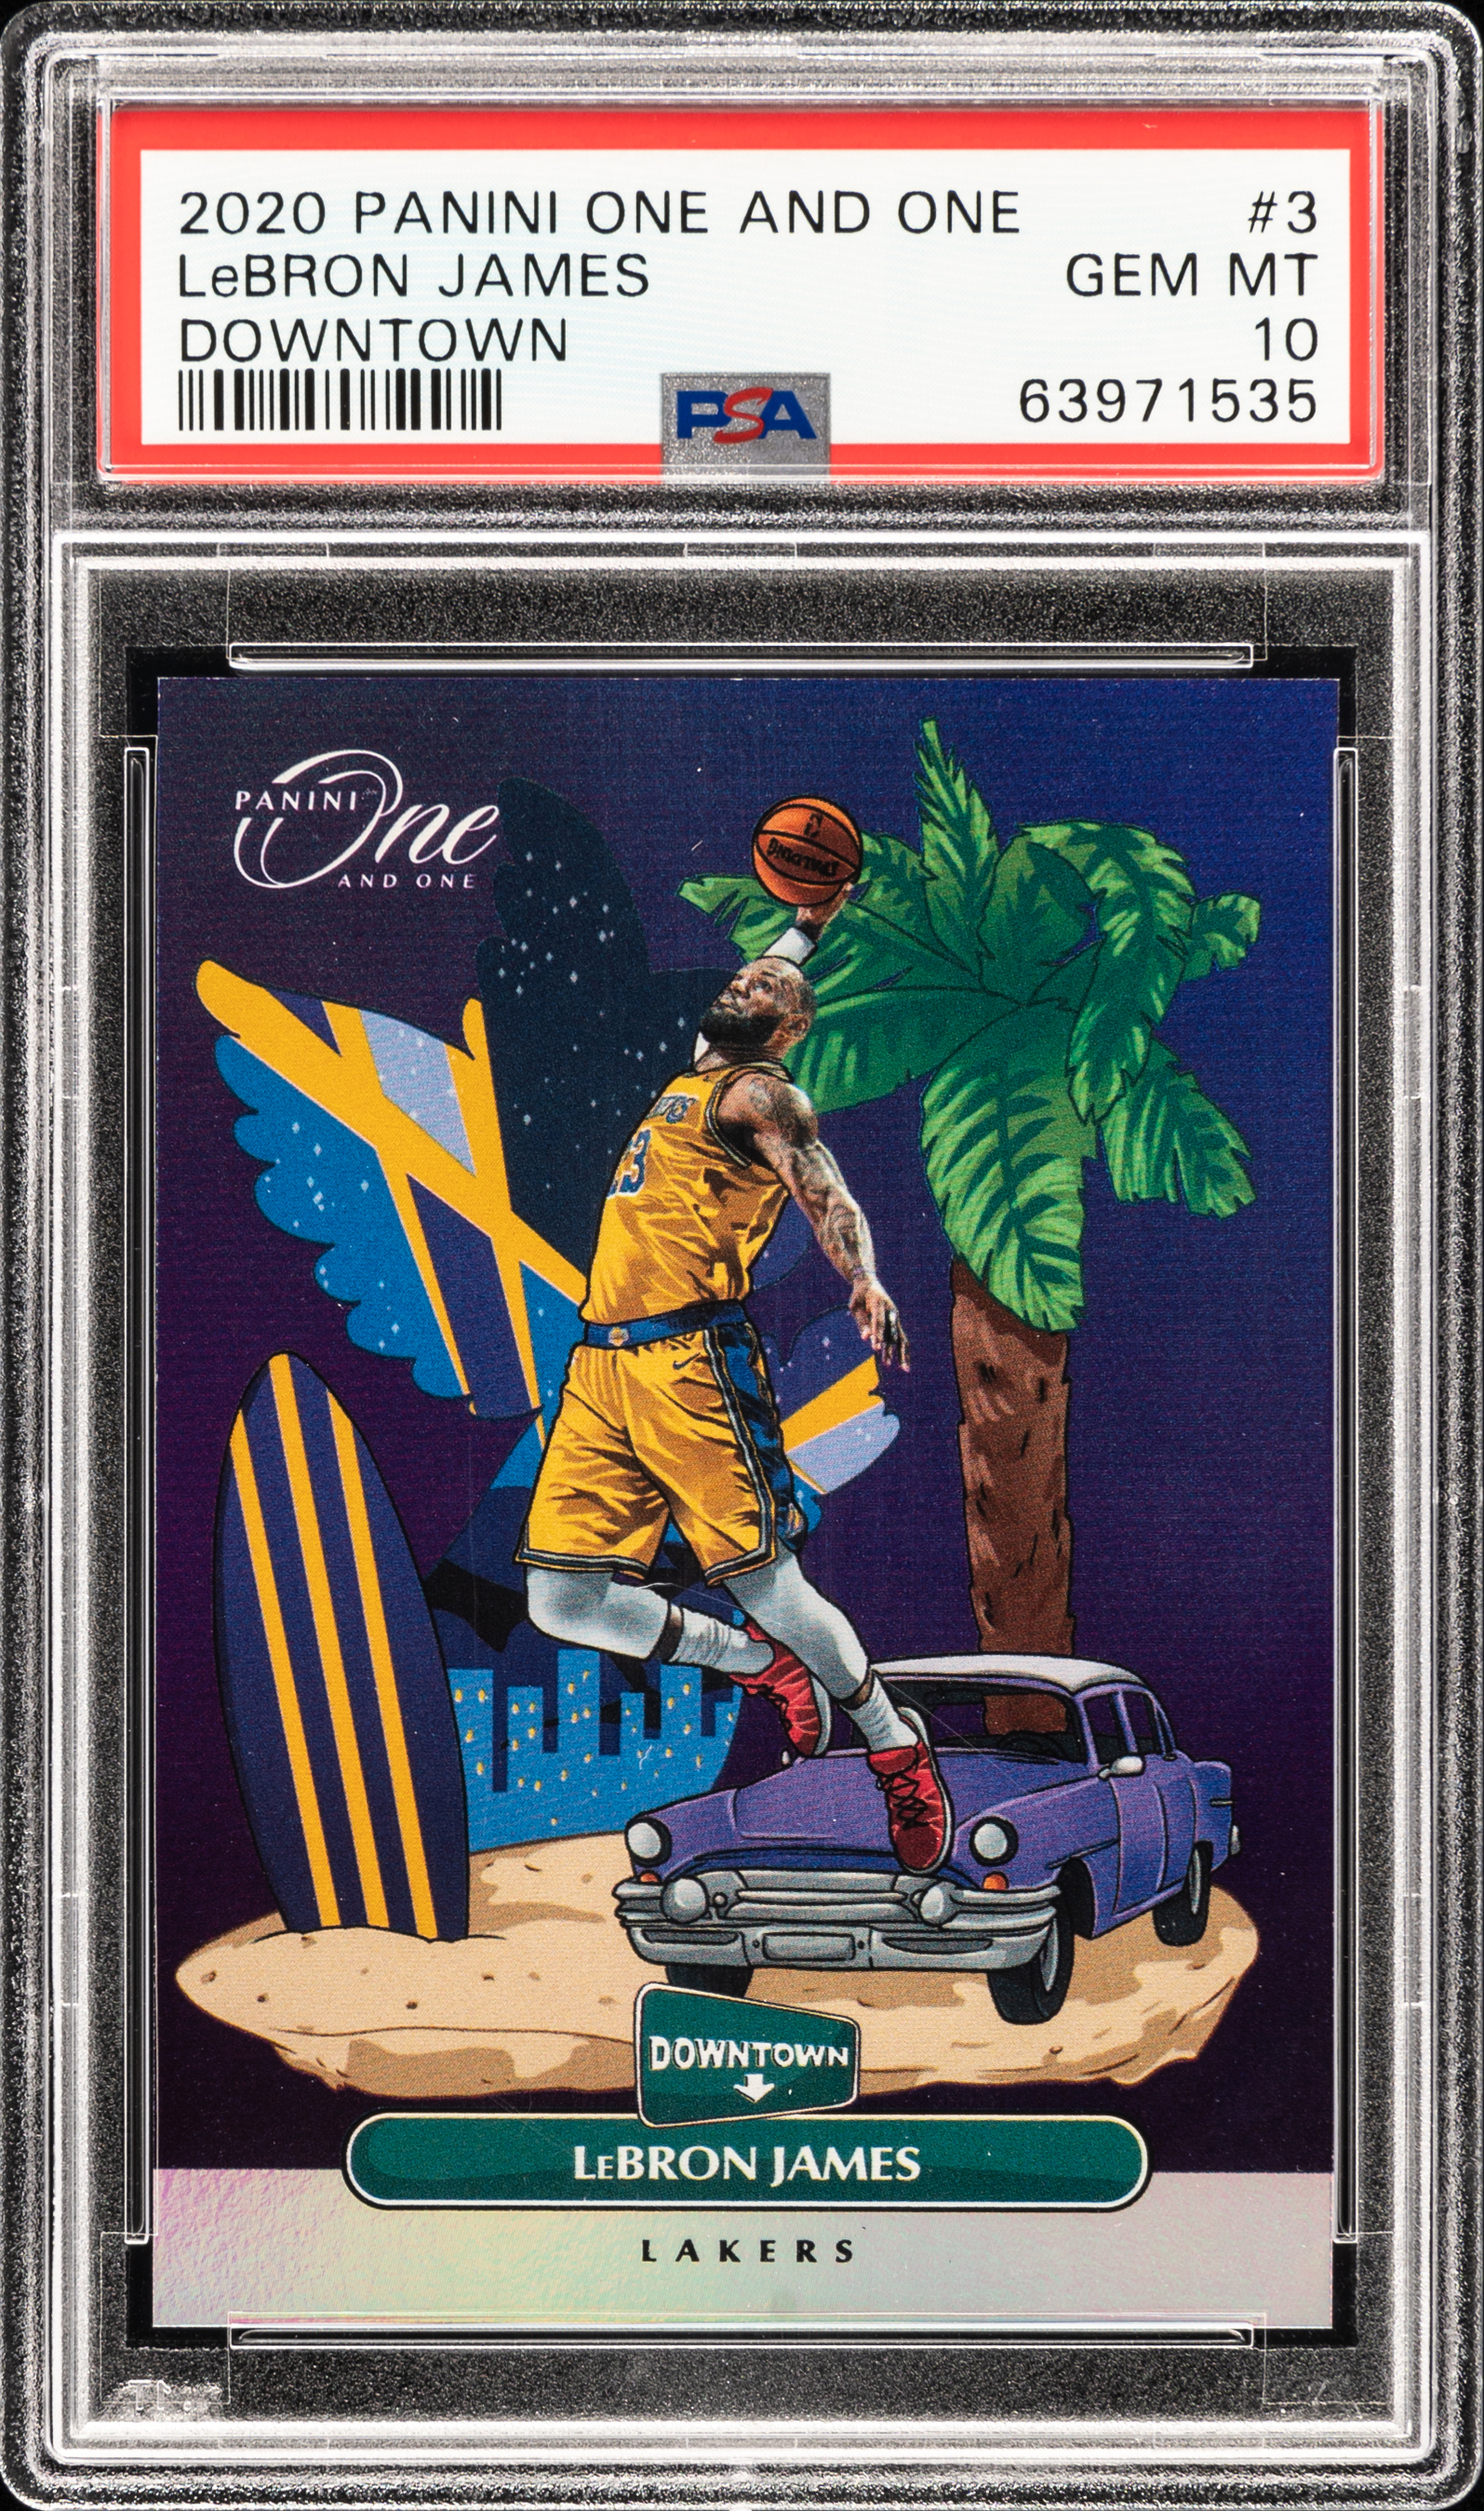 2020 Panini One and One Downtown 3 LeBron James – PSA GEM MT 10